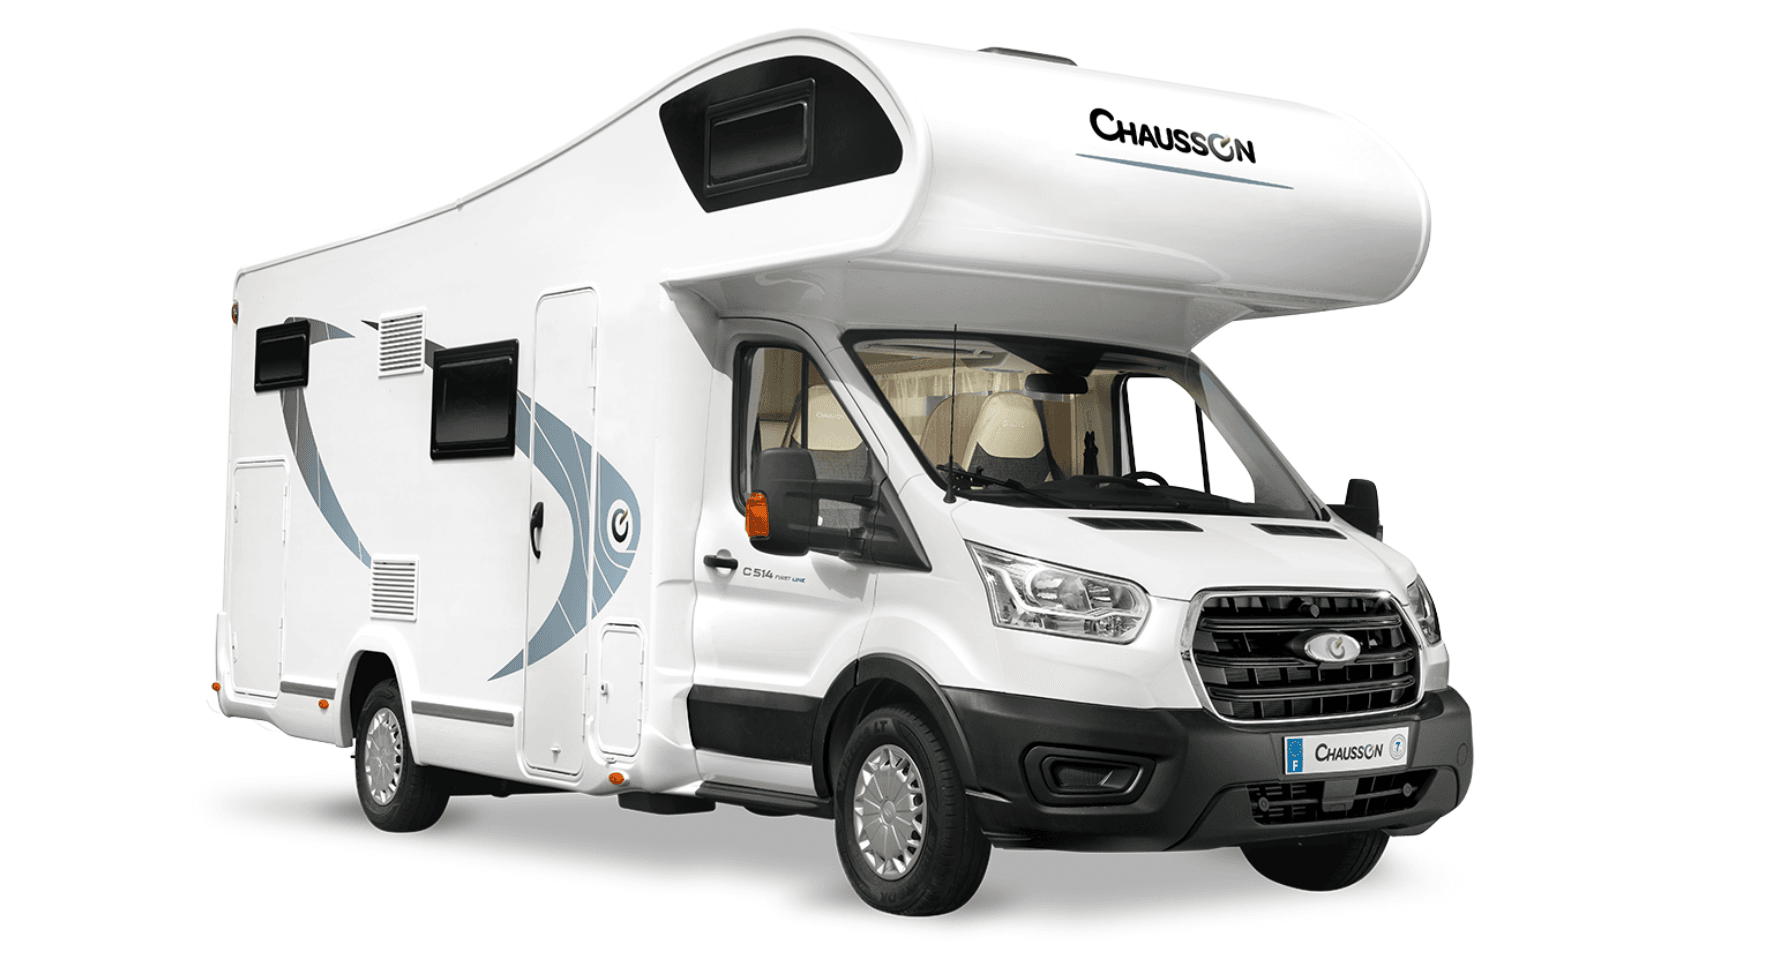 Chausson for families - modern Fiat and Ford alcoves – main image